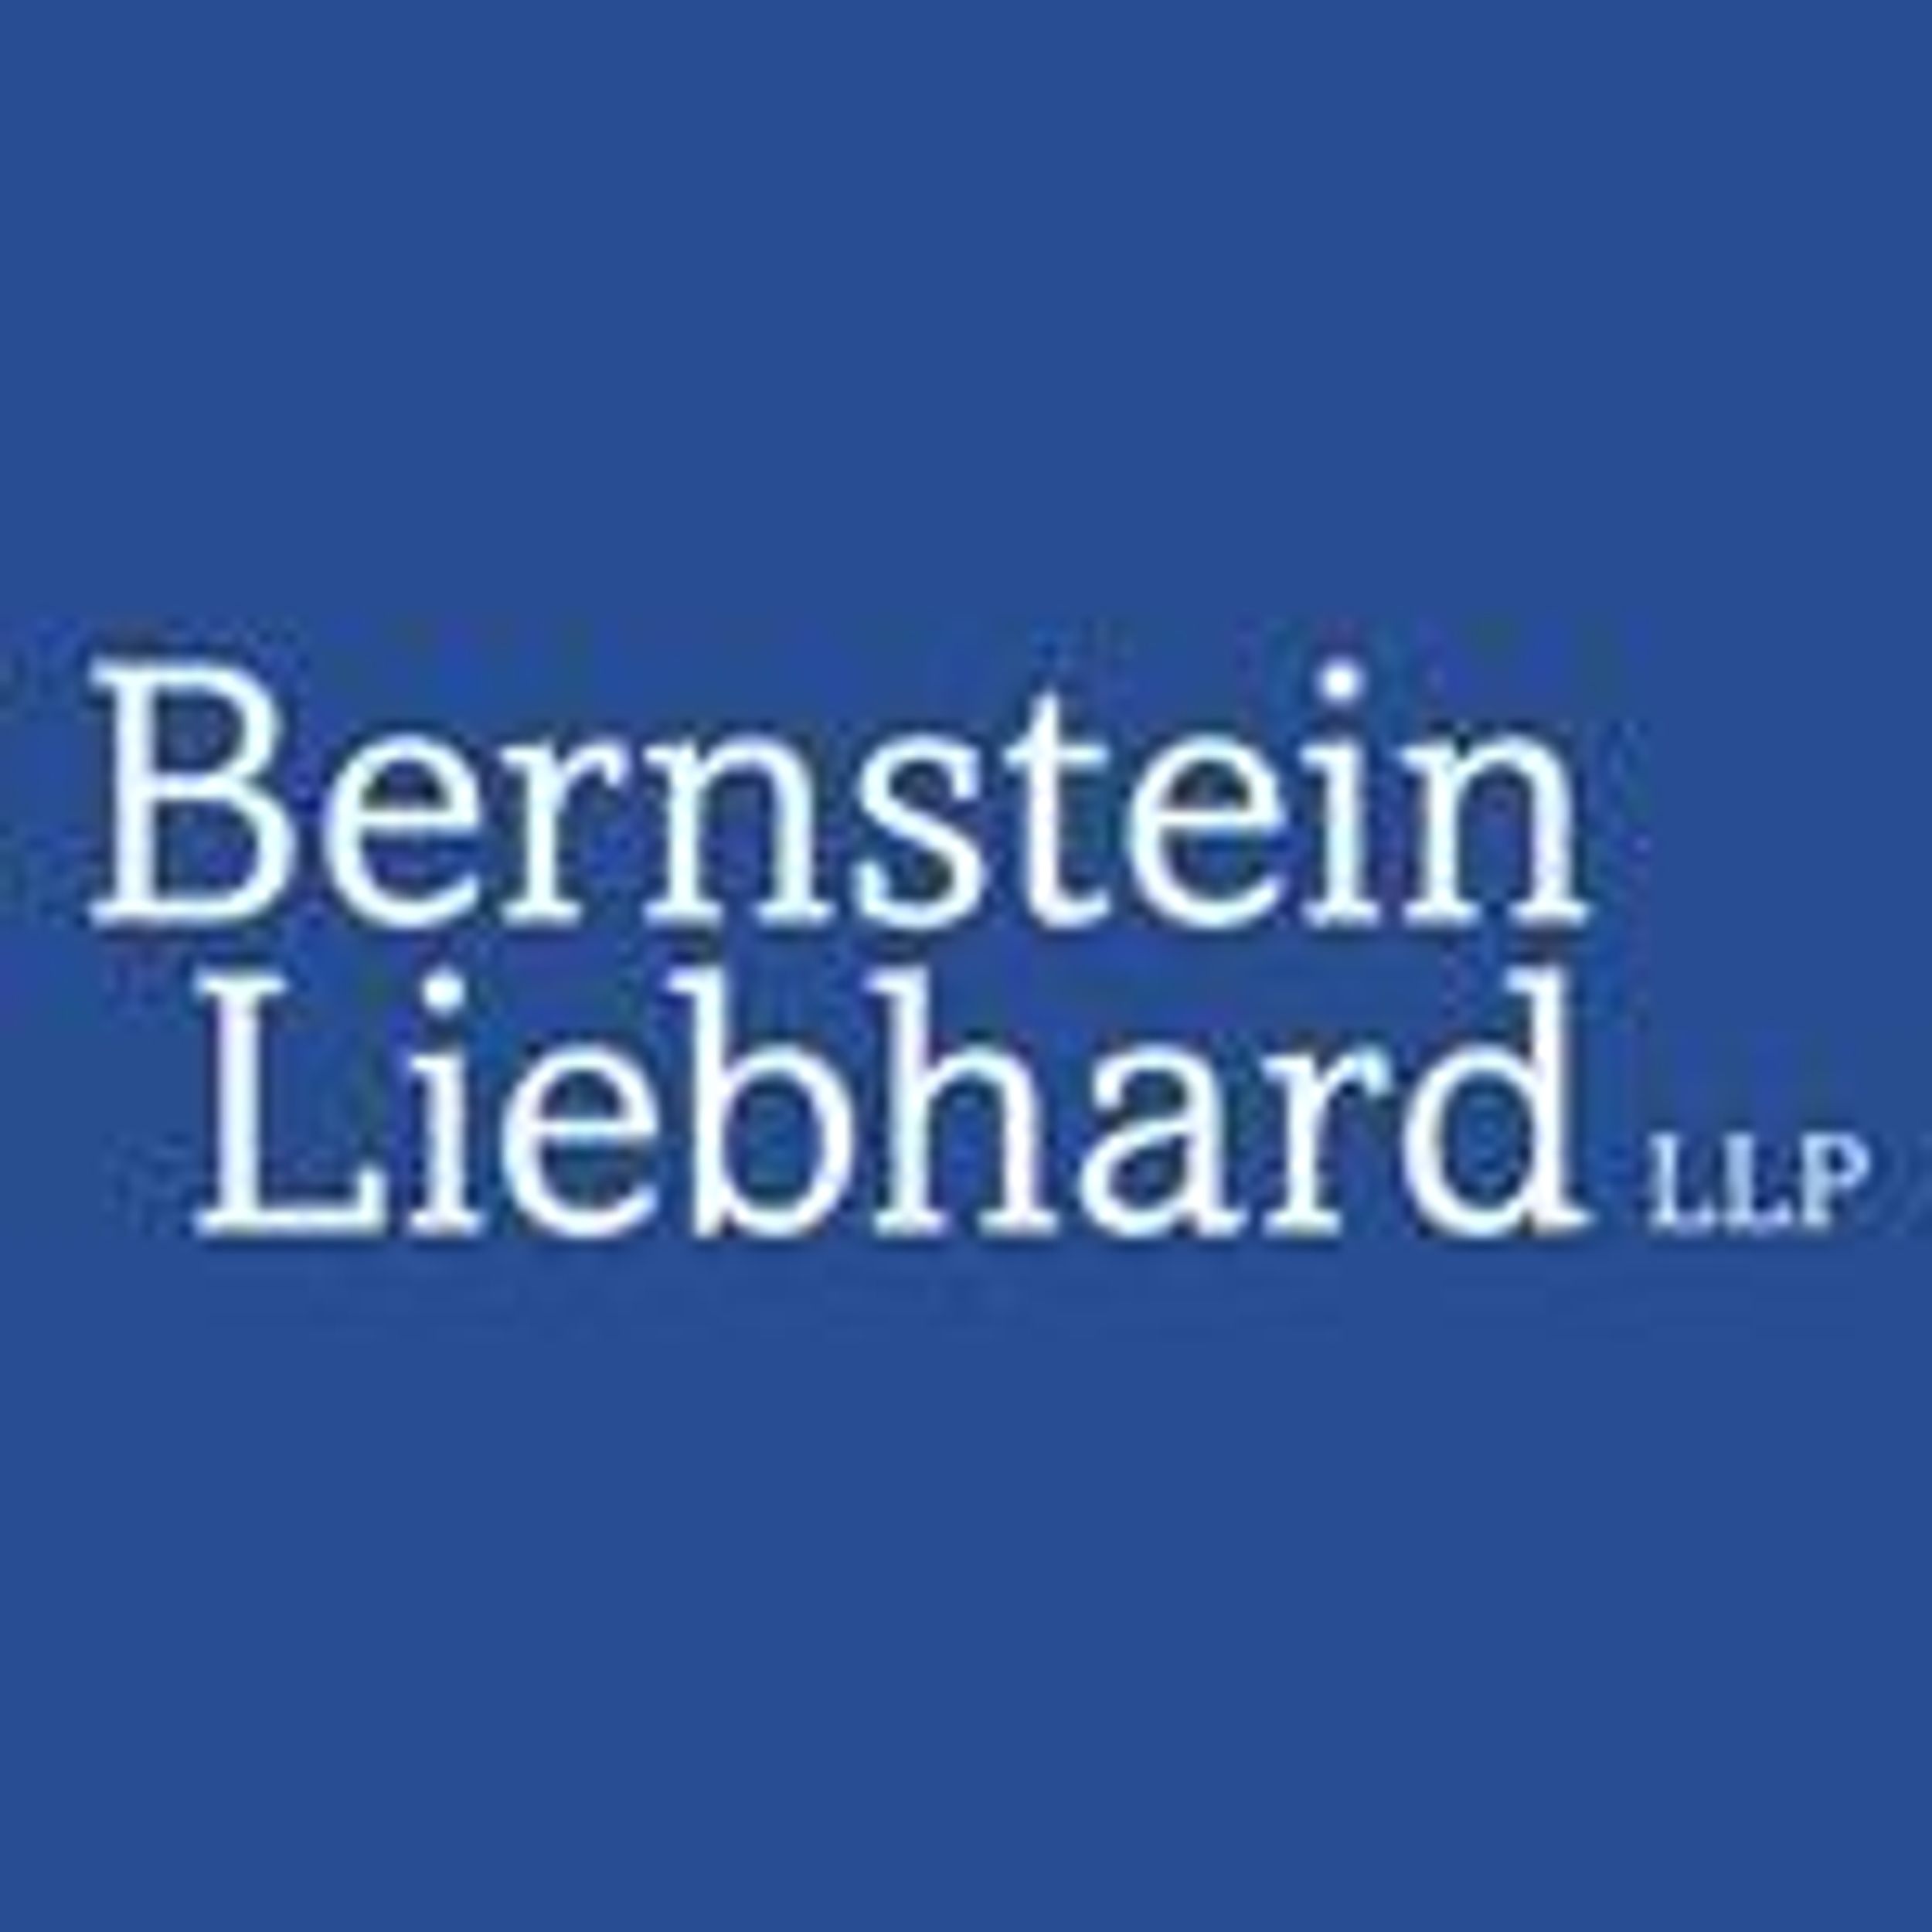 PAYPAL  INVESTOR CLASS ACTION FILING DEADLINE: Bernstein Liebhard LLP Reminds Investors of the Deadline to File a Lead Plaintiff Motion in a Securities Class Action Lawsuit Against PayPal Holdings, Inc.